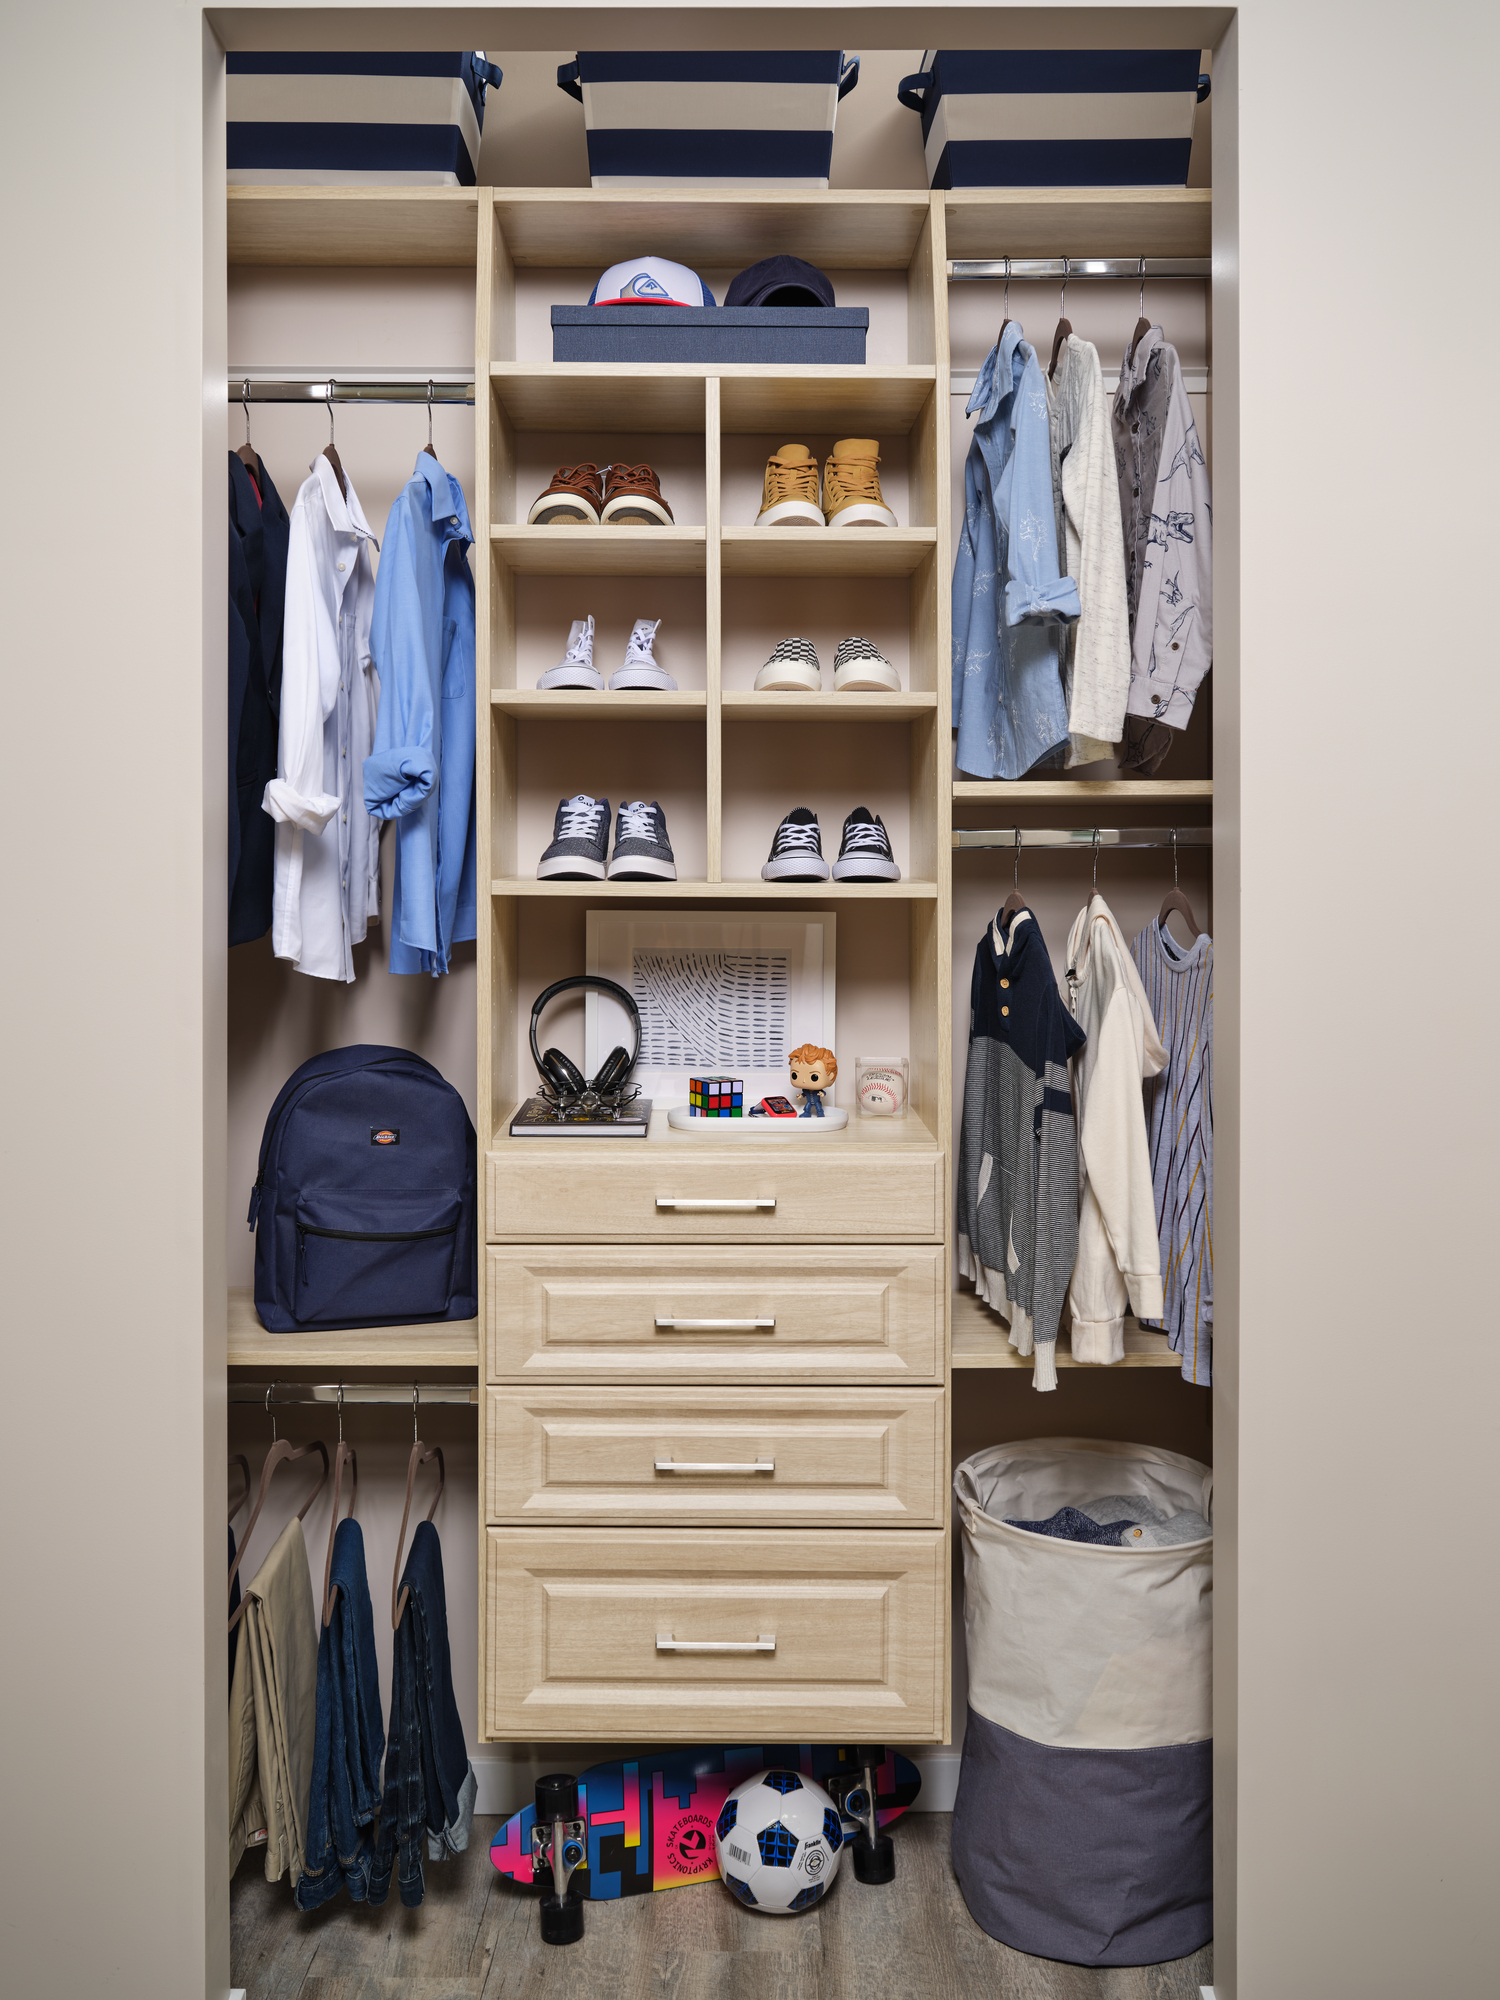 Closet with for hanging storage for a young boys cloths from Inspired Closets